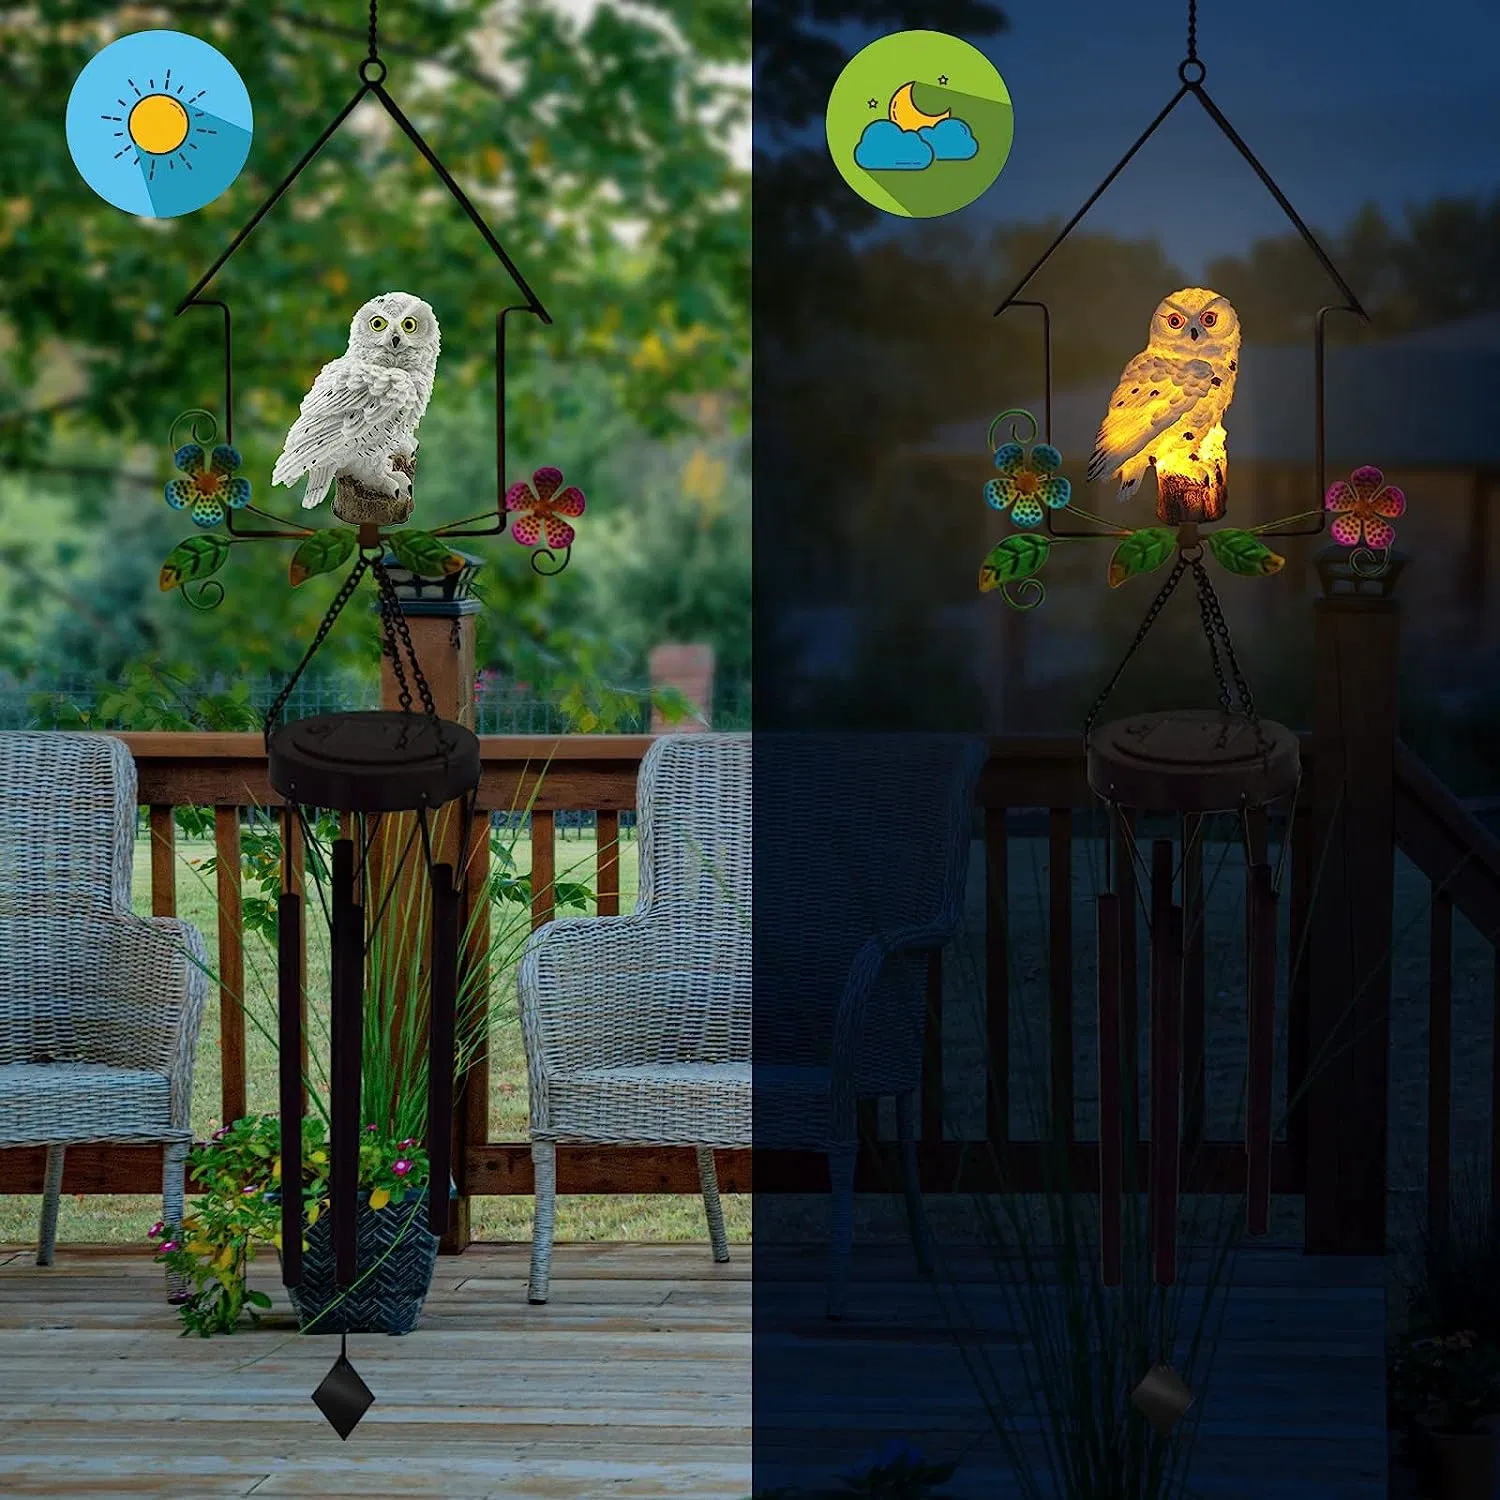 Solar Owl Wind Chime Outdoor LED Light up Bird Wind Chime